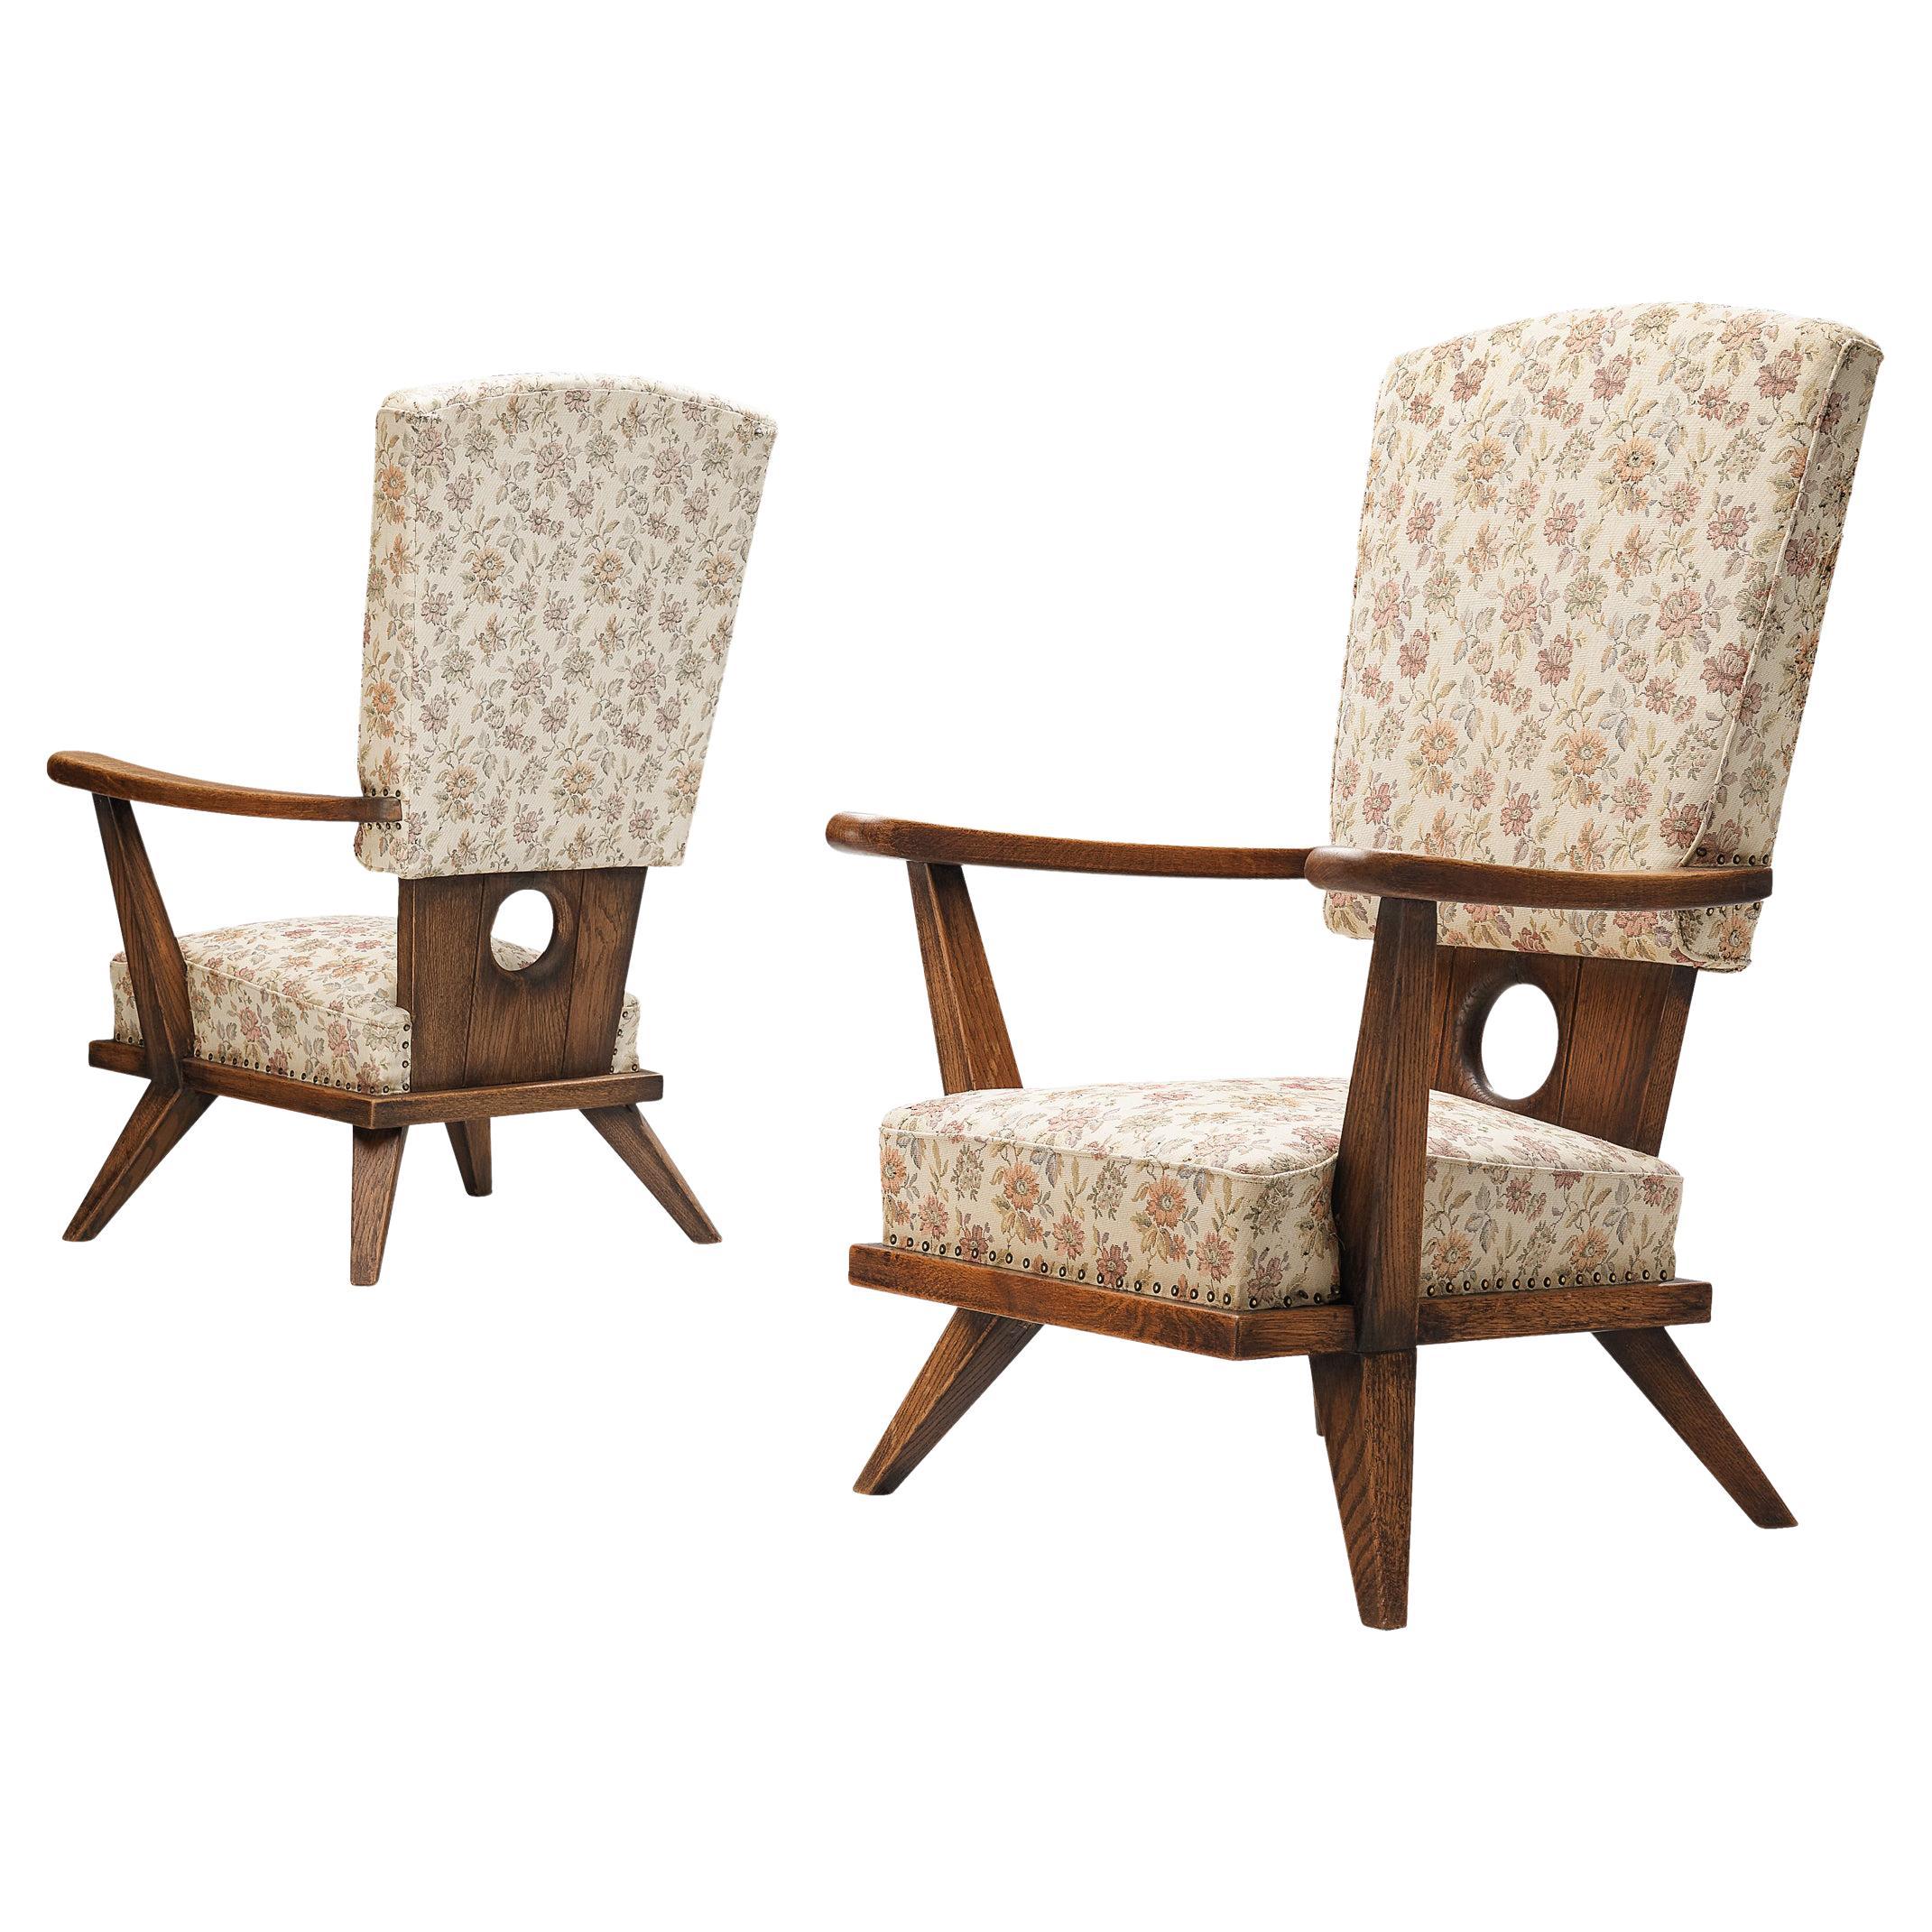 Rustic Dutch Pair of Lounge Chairs in Stained Oak